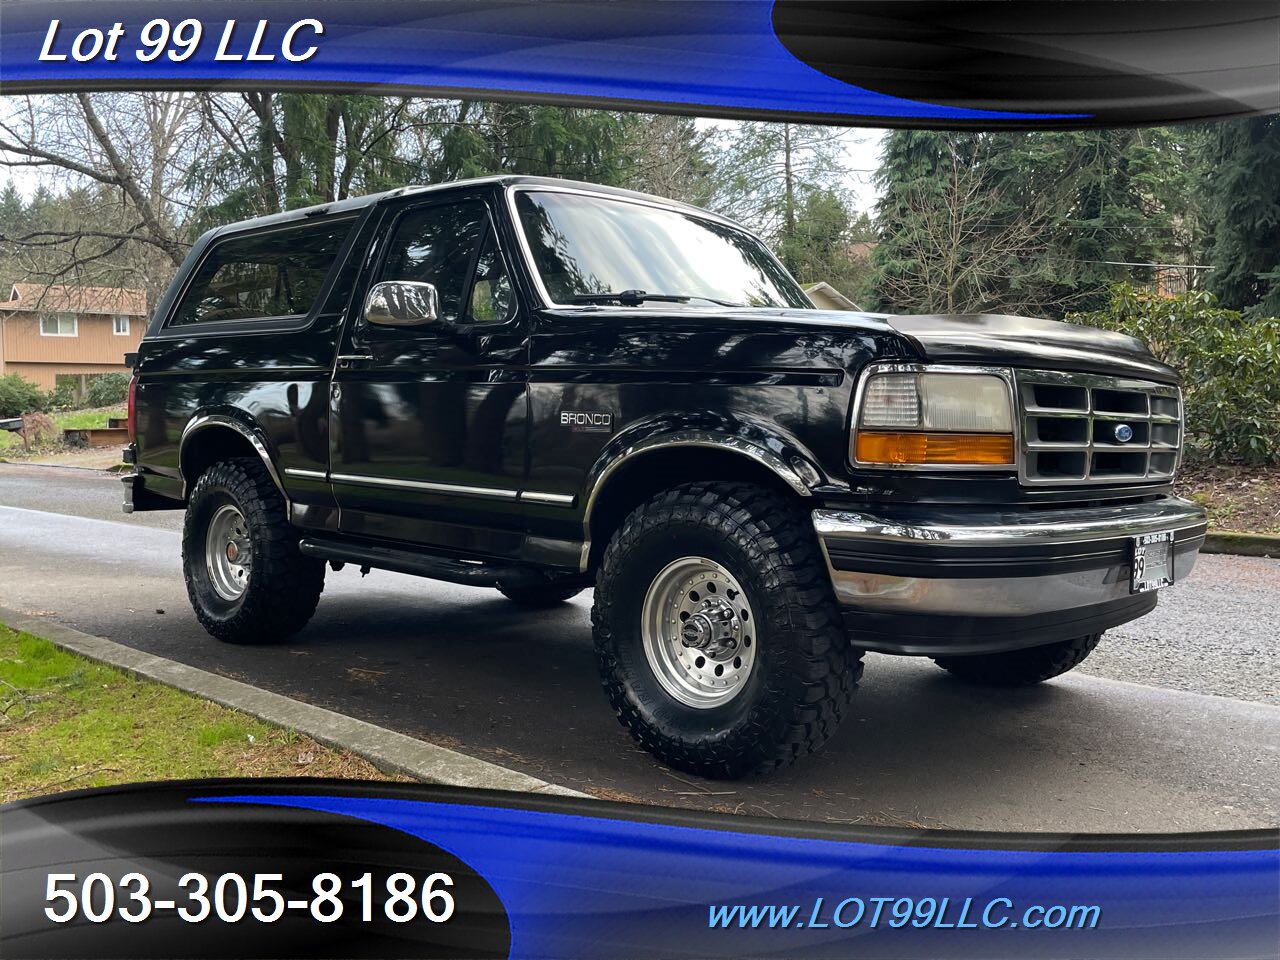 1993 Ford Bronco XLT 4x4 5.8L V8 New 33 " Tires and Carpet KIT   - Photo 4 - Milwaukie, OR 97267